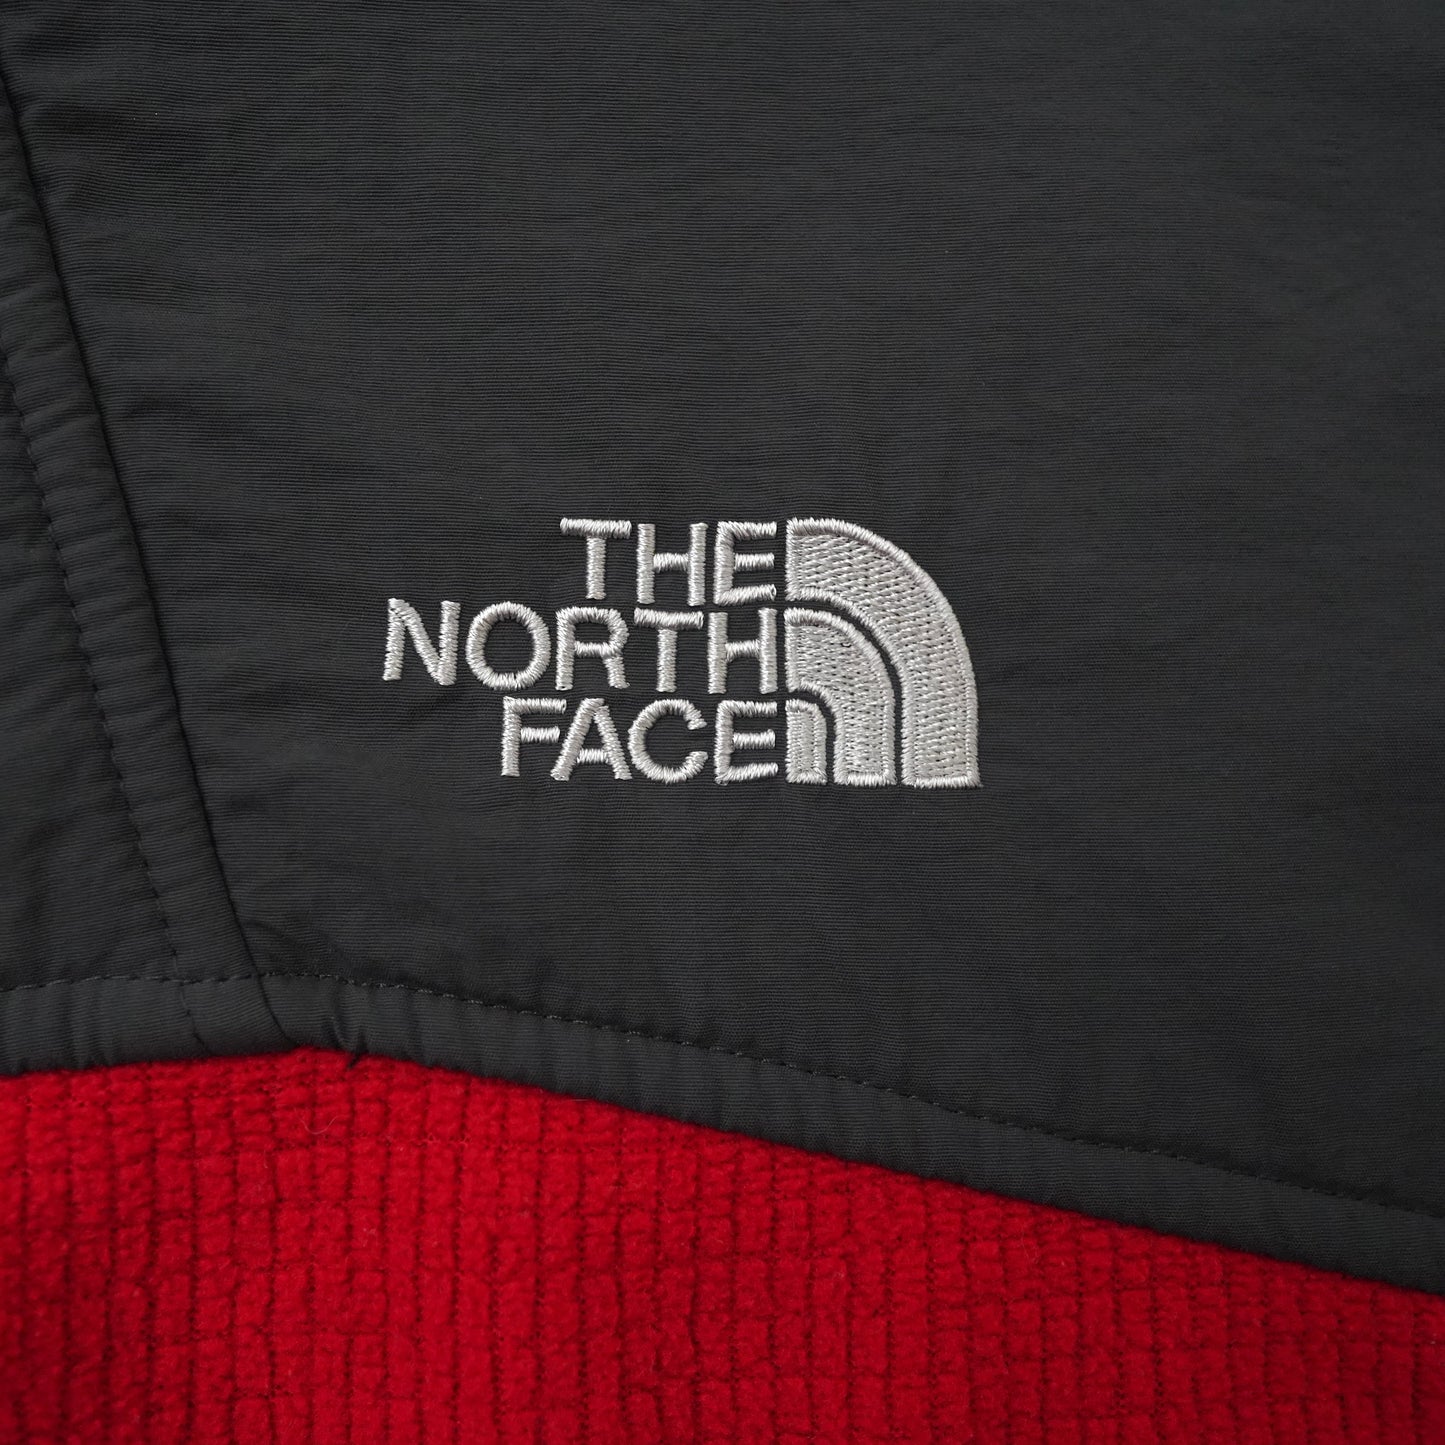 THE NORTH FACE jacket